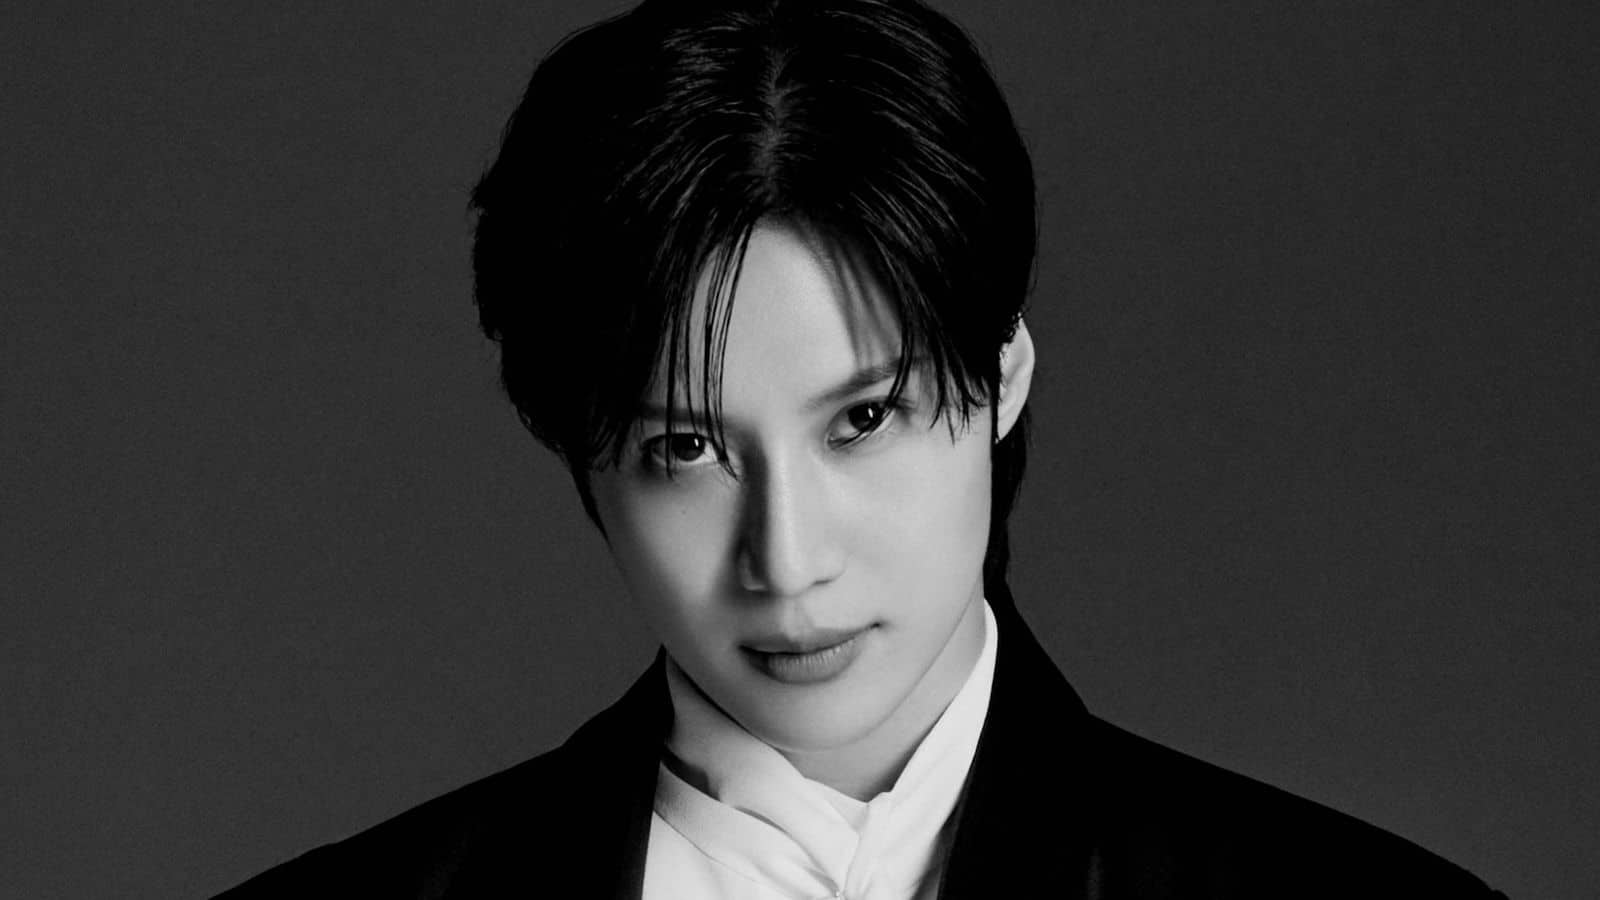 SHINee's Taemin signs exclusive deal with Big Planet post-SM exit